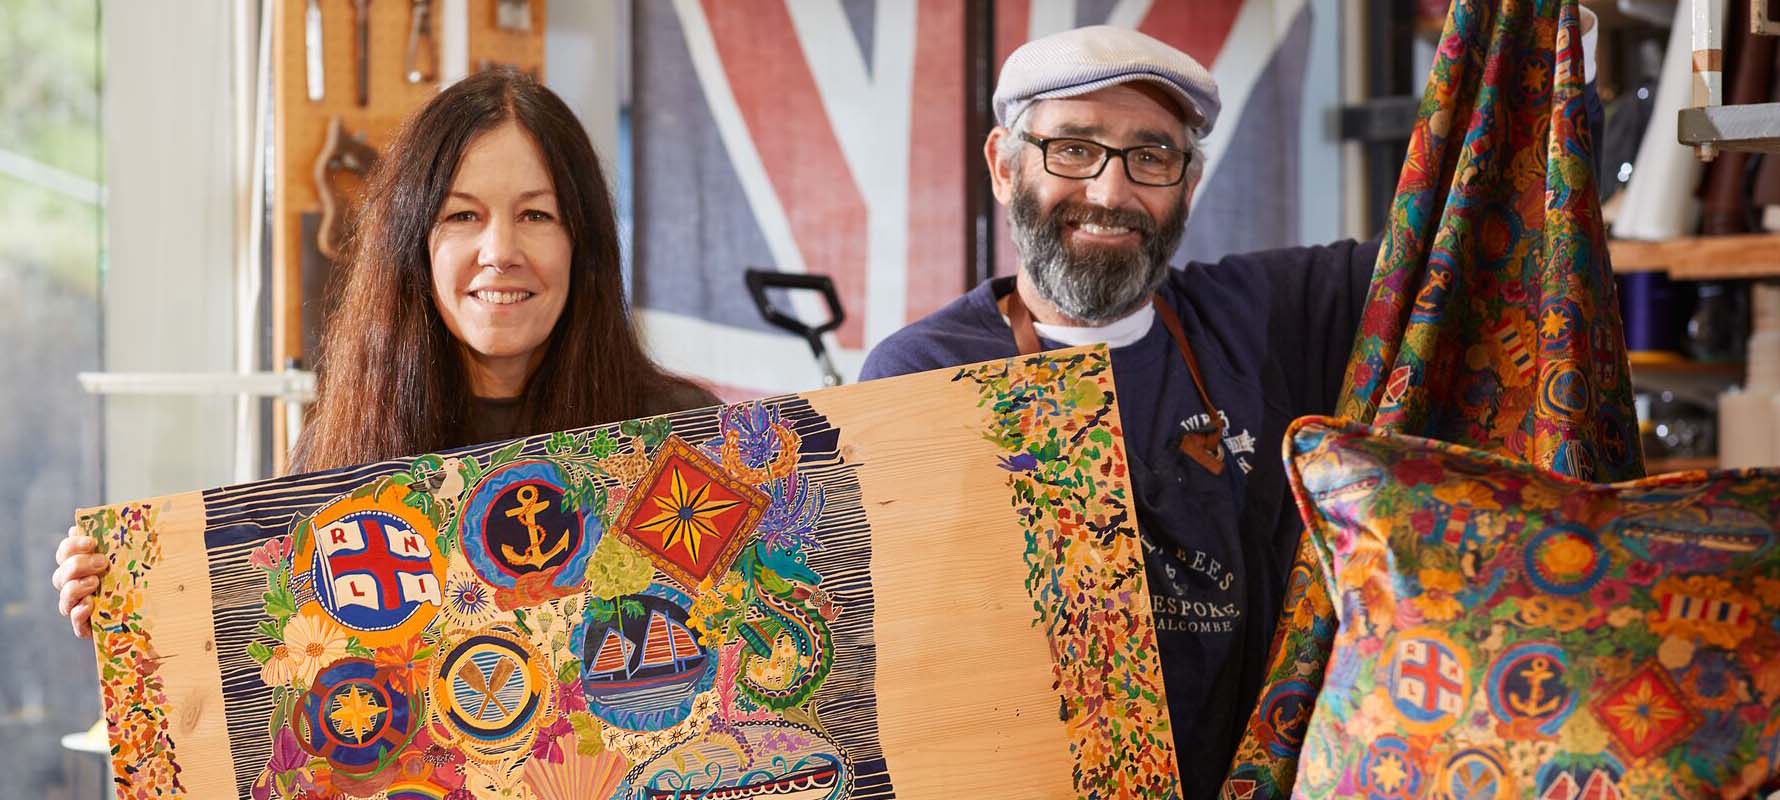 A woman and a man are stood in a workshop and are holding up products with a colourful, intricate design inspired by the RNLI.